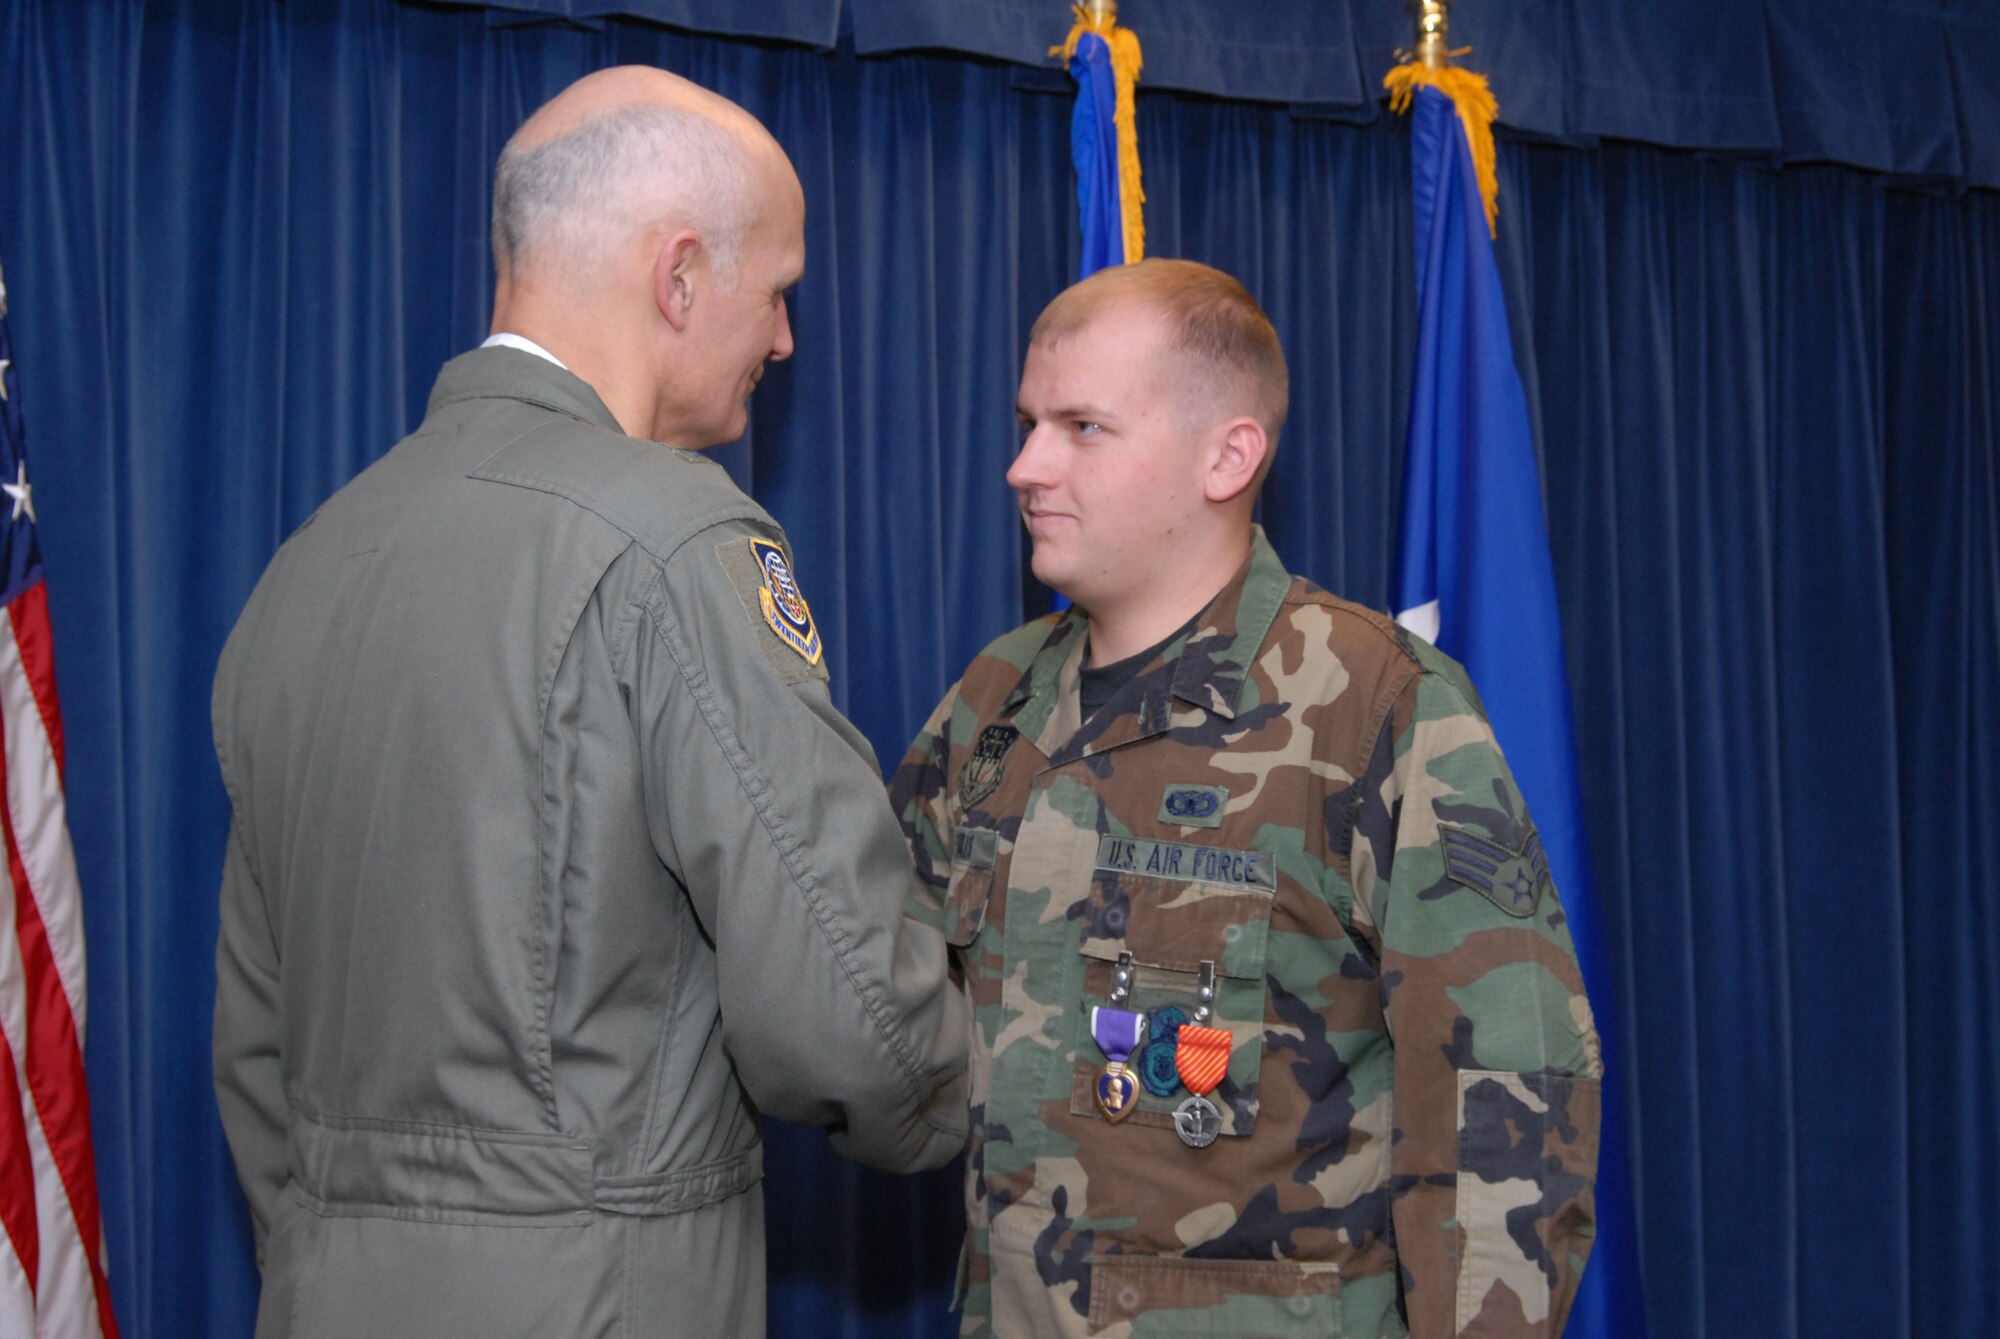 Senior Airman John Soules, 741st Missile Security Forces Squadron member, shakes hands with Maj. Gen. Roger Burg, 20th Air Force commander, Dec. 10 after receiving the Purple Heart and Air Force Combat Action Medal for wounds received in action June 28, 2007. He volunteered for the 365-day deployment to support Operation Iraqi Freedom. (U.S. Air Force photo/John Turner) 